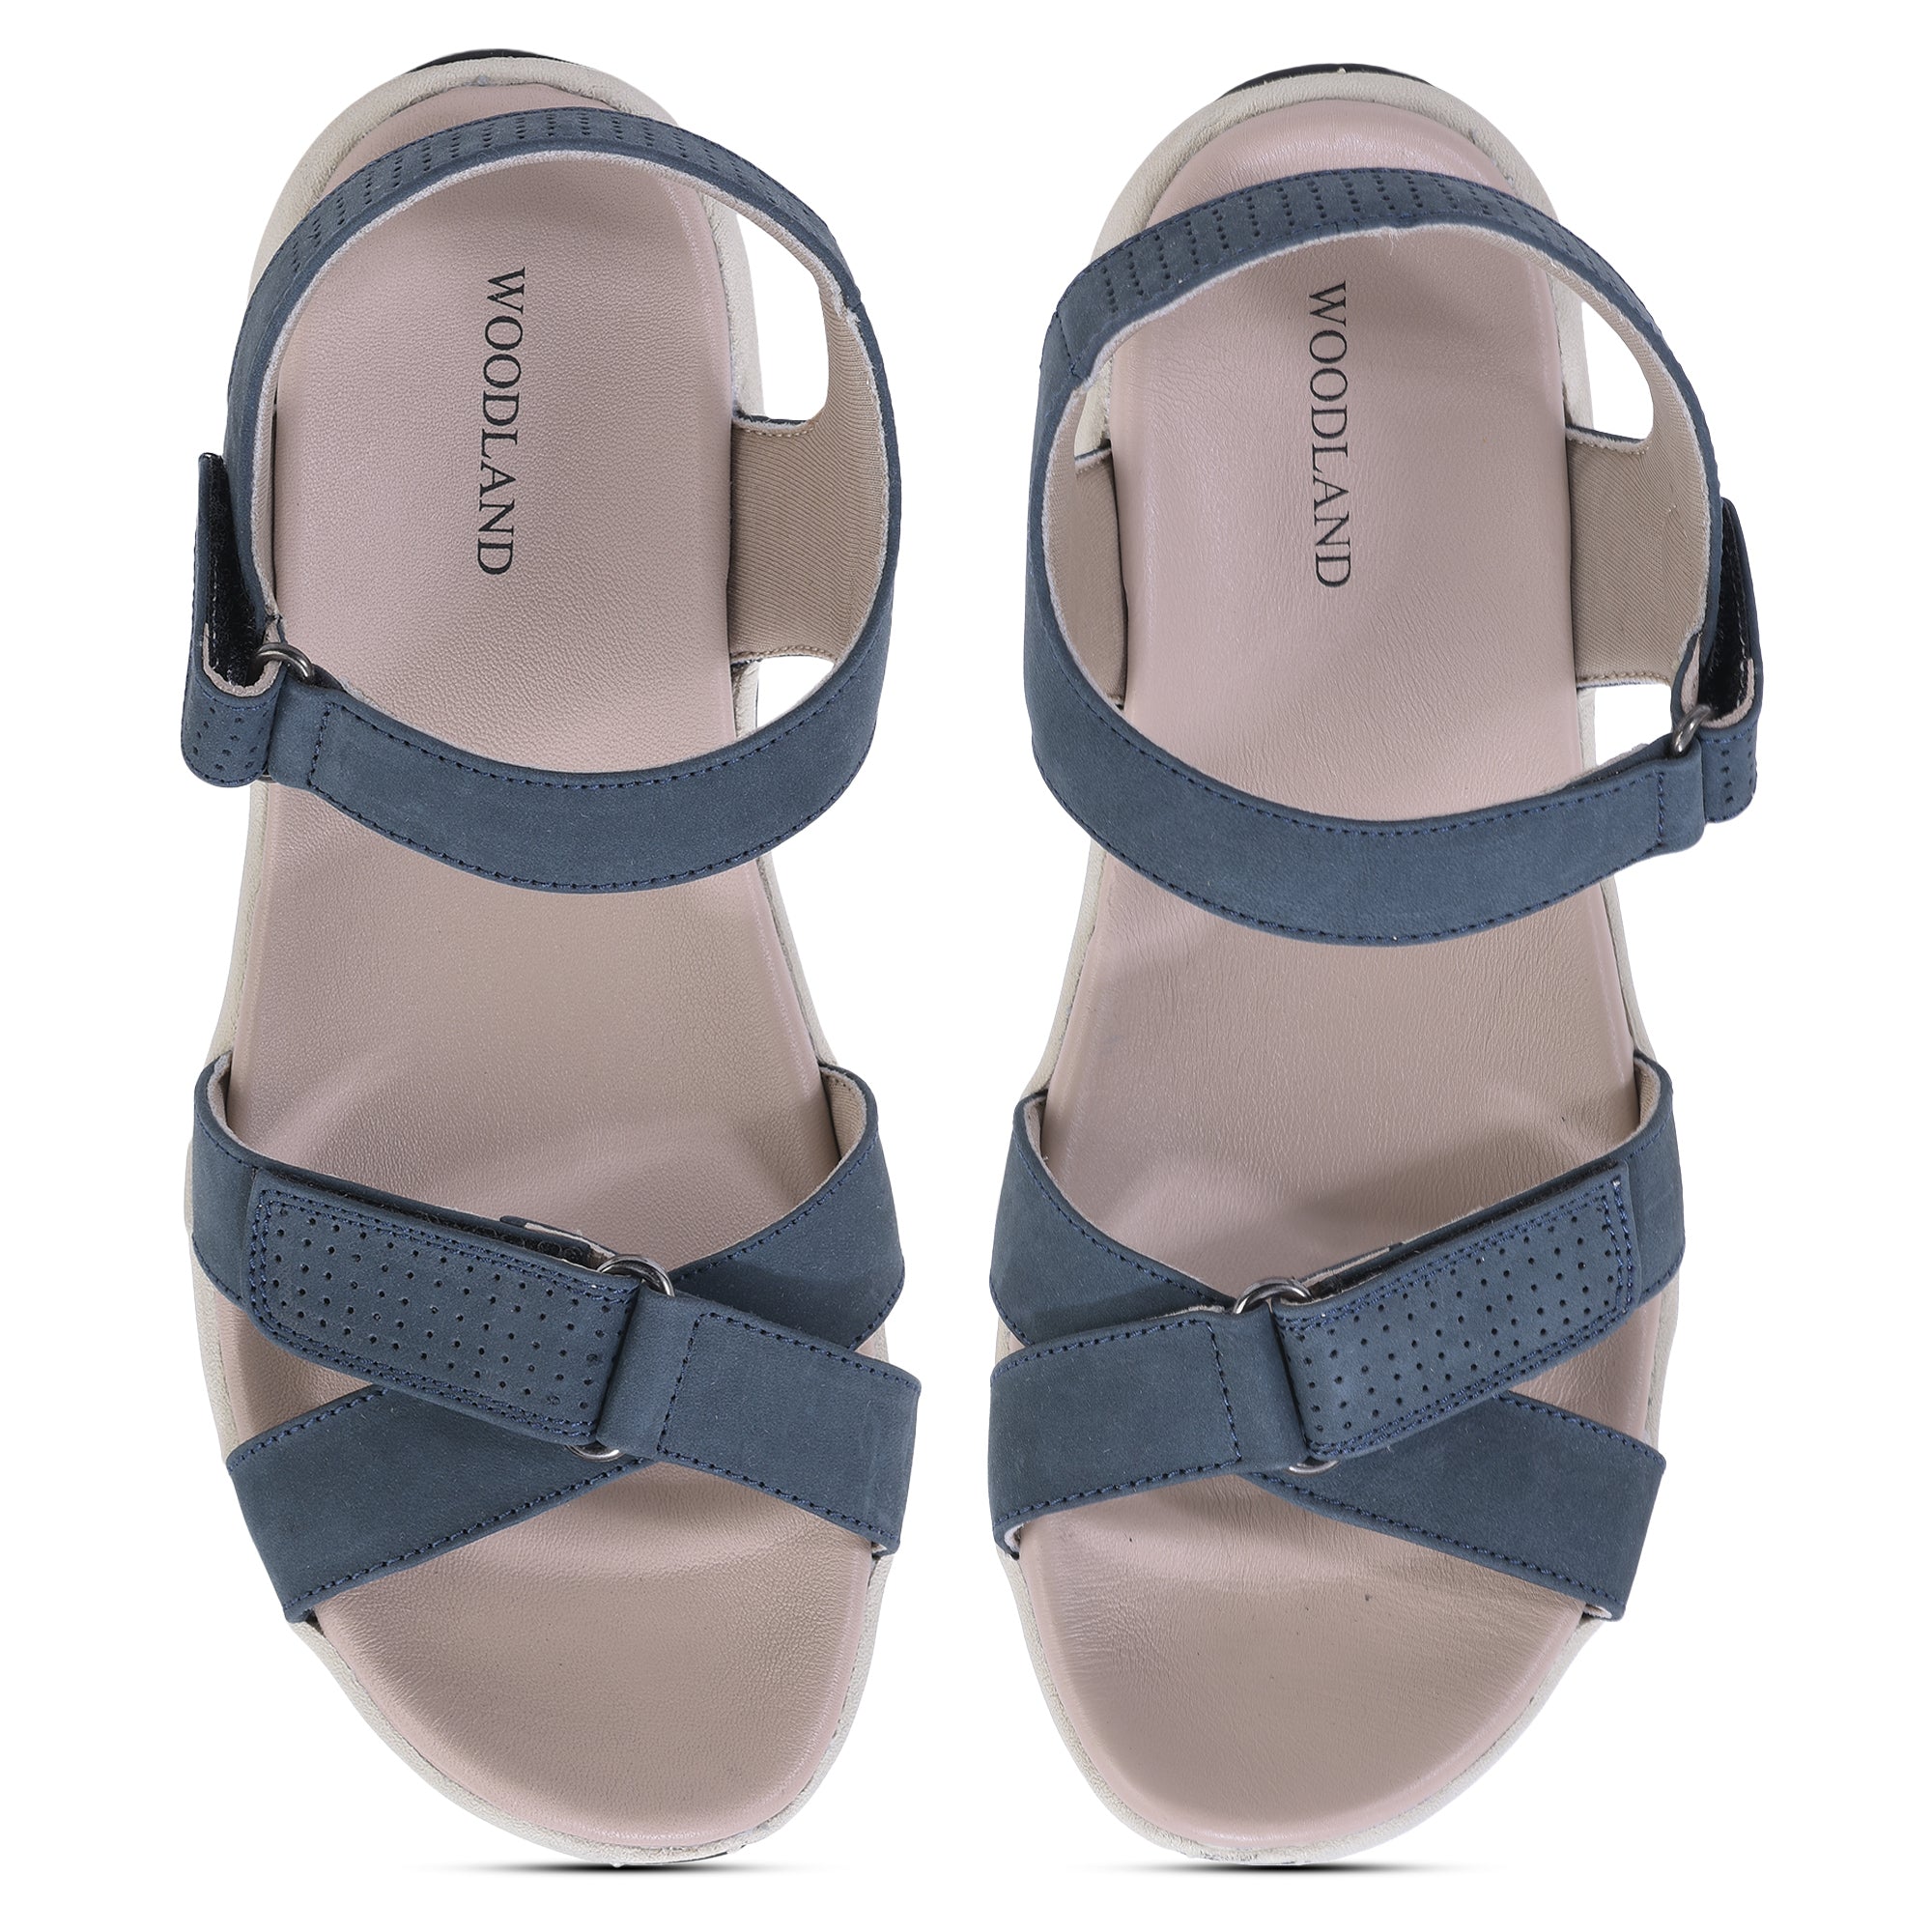  Gibobby Sandals Women Casual Summer，Orthopedic Wedge Sandals  Hollow Out Platform Gladiator Sandals Dressy Beach Shoes : Sports & Outdoors